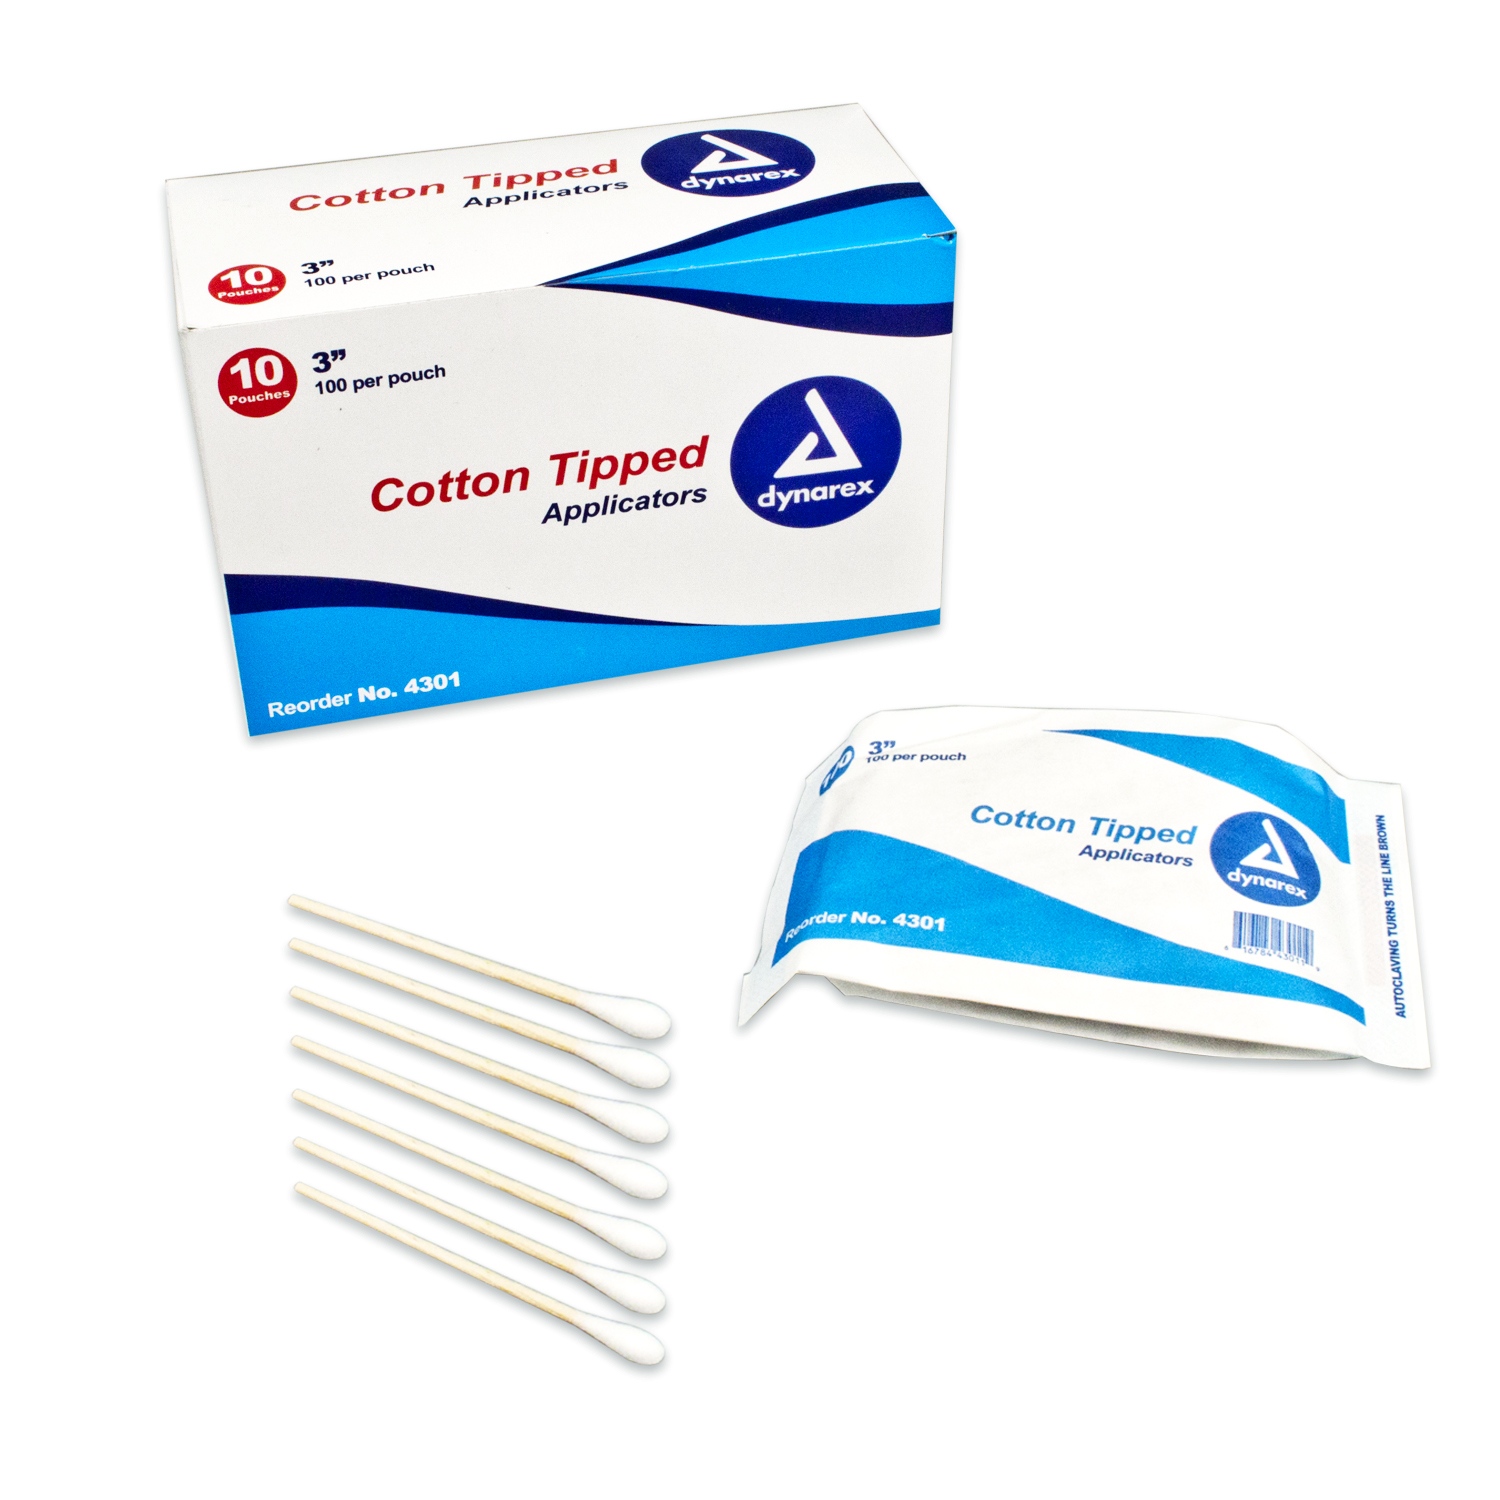 Cotton Tipped Applicators (Bag of 100) image